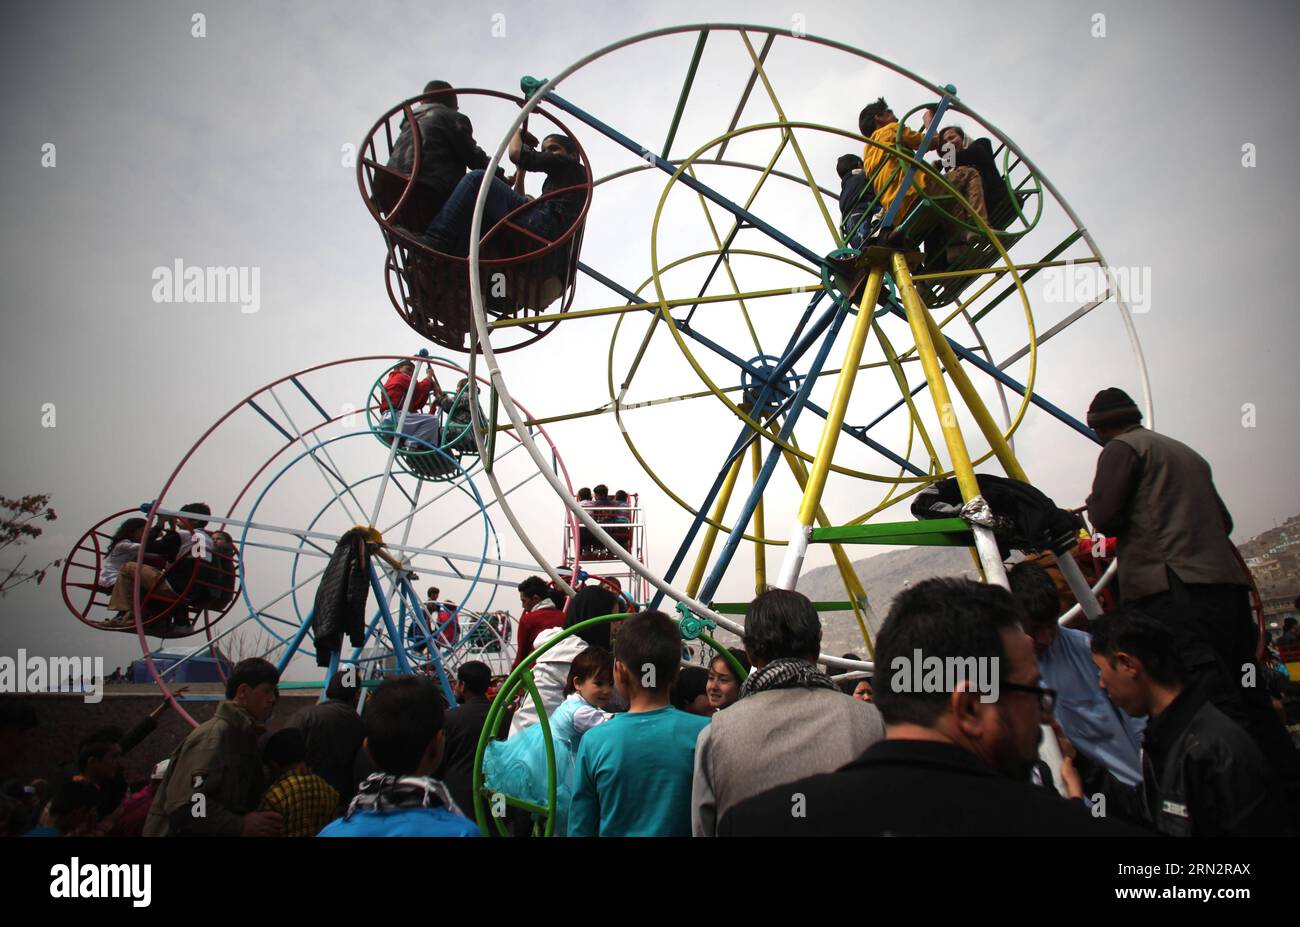 (150321) -- KABUL, March 21, 2015 -- Afghan children enjoy the sky wheel during a celebration of Nowruz festival in Kabul, Afghanistan, March 21, 2015. Afghans celebrate the Nowruz festival as the first day of the year in Persian calendar. ) AFGHANISTAN-KABUL-NOWRUZ FESTIVAL AhmadxMassoud PUBLICATIONxNOTxINxCHN   Kabul March 21 2015 Afghan Children Enjoy The Sky Wheel during a Celebration of Nowruz Festival in Kabul Afghanistan March 21 2015 Afghans Celebrate The Nowruz Festival As The First Day of The Year in Persian Calendar Afghanistan Kabul Nowruz Festival  PUBLICATIONxNOTxINxCHN Stock Photo